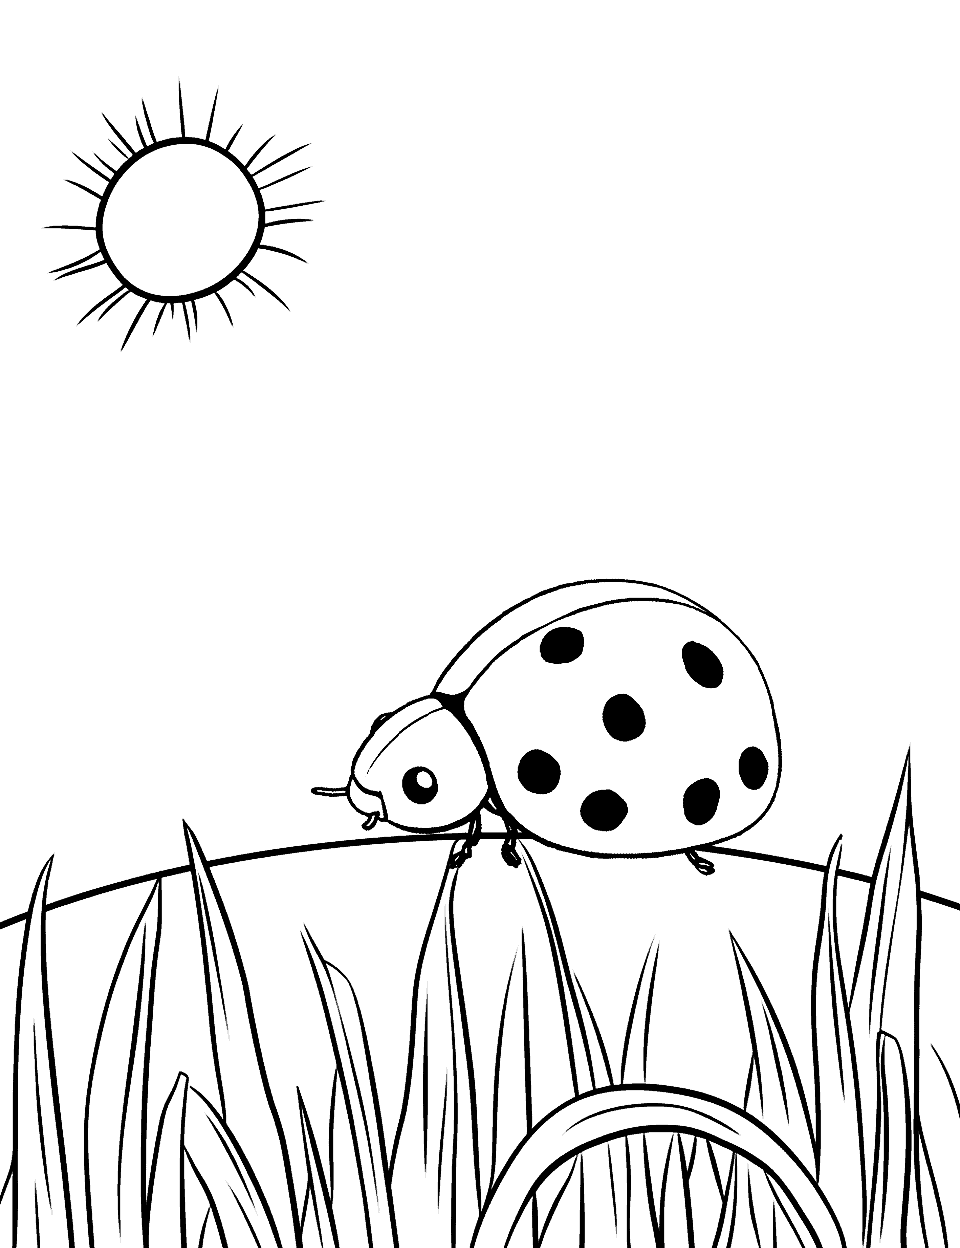 Sunbathing Ladybug Coloring Page - A ladybug enjoying the warmth on a sunny patch of grass.